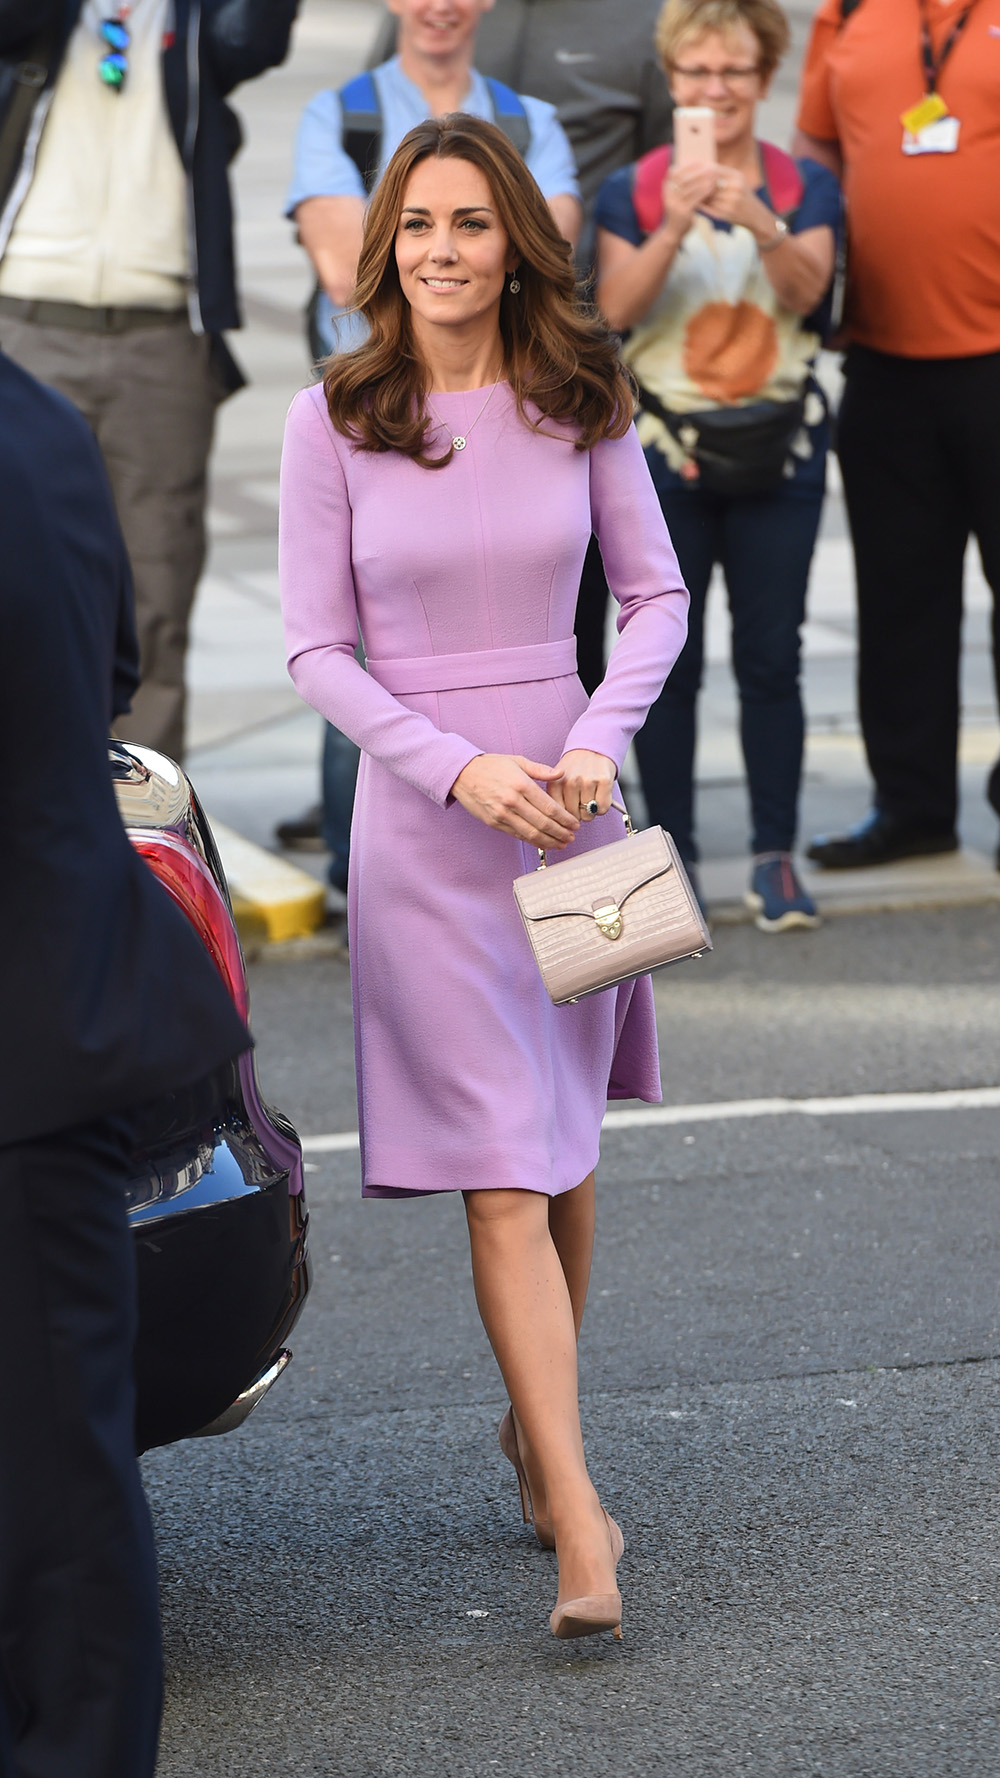 LONDON, ENGLAND - OCTOBER 09: Catherine, Duchess of Cambridge arrives for the first Global Ministerial Mental Health Summit at London County Hall on October 9, 2018 in London, England. The summit which is being co-hosted by the UK Government and the OECD and will run from the 9th-10th October. (Photo by Eddie Mulholland - WPA Pool/Getty Images)